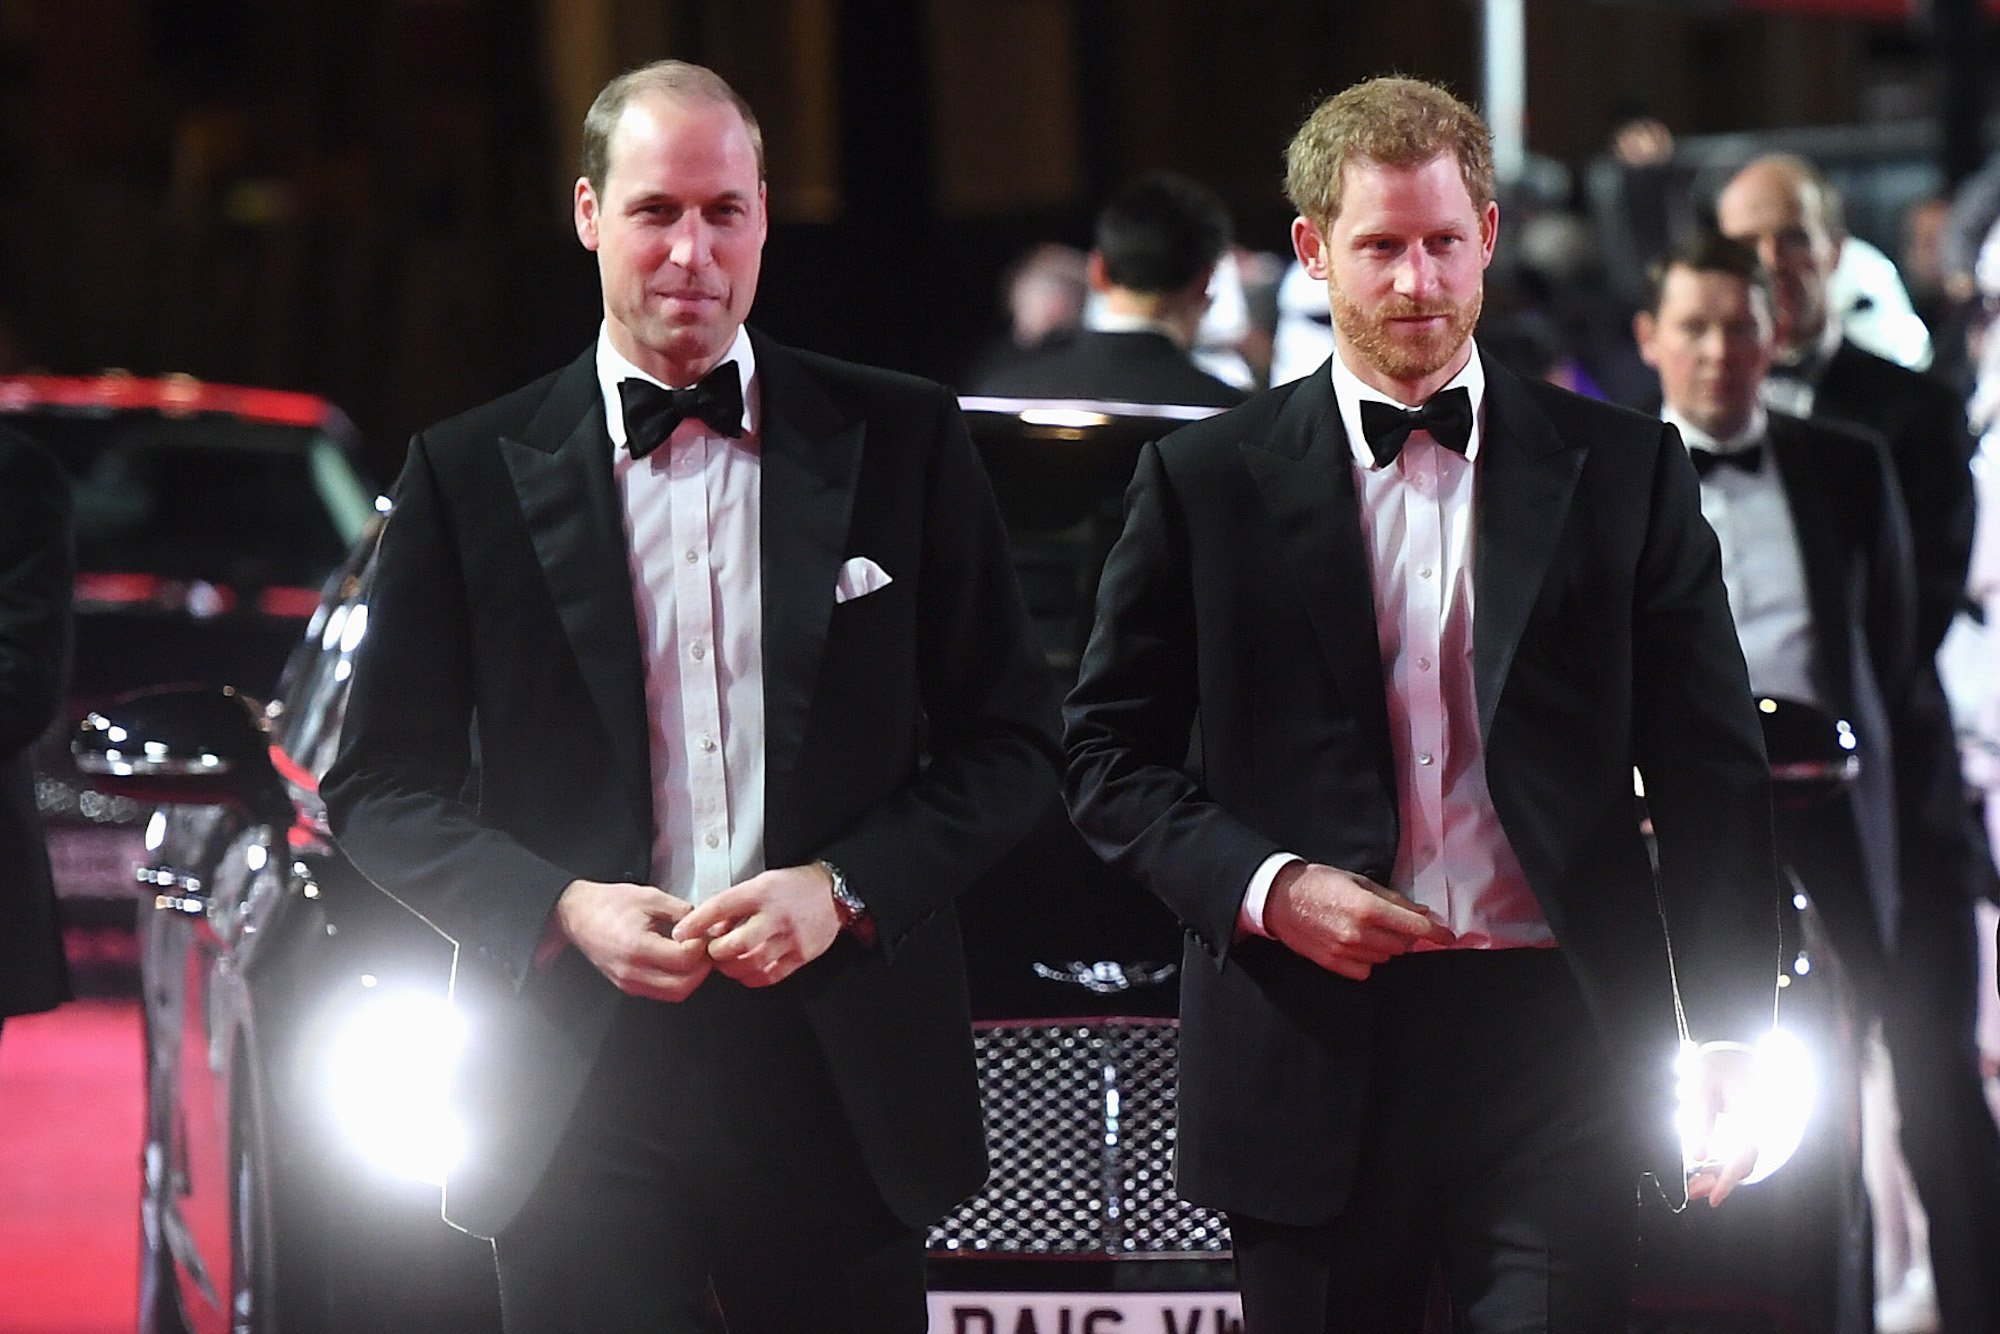 Prince William and Prince Harry, slightly smiling